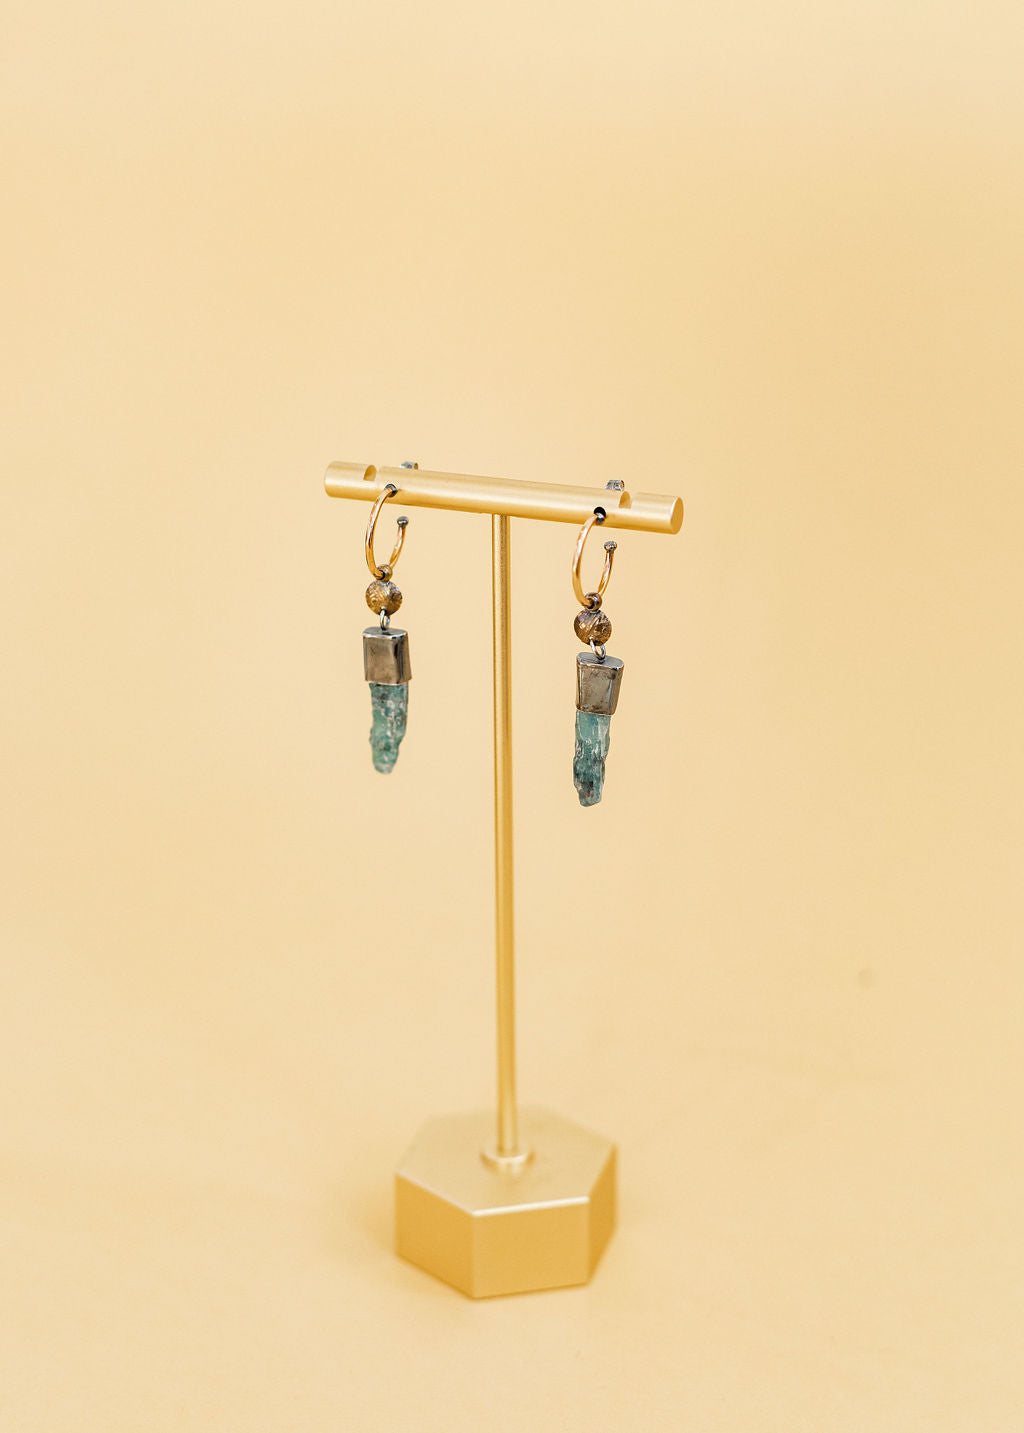 Two sister earrings from Claire and Sommers Buck with sterling silver hoops and kyanite crystals hanging down earring stand